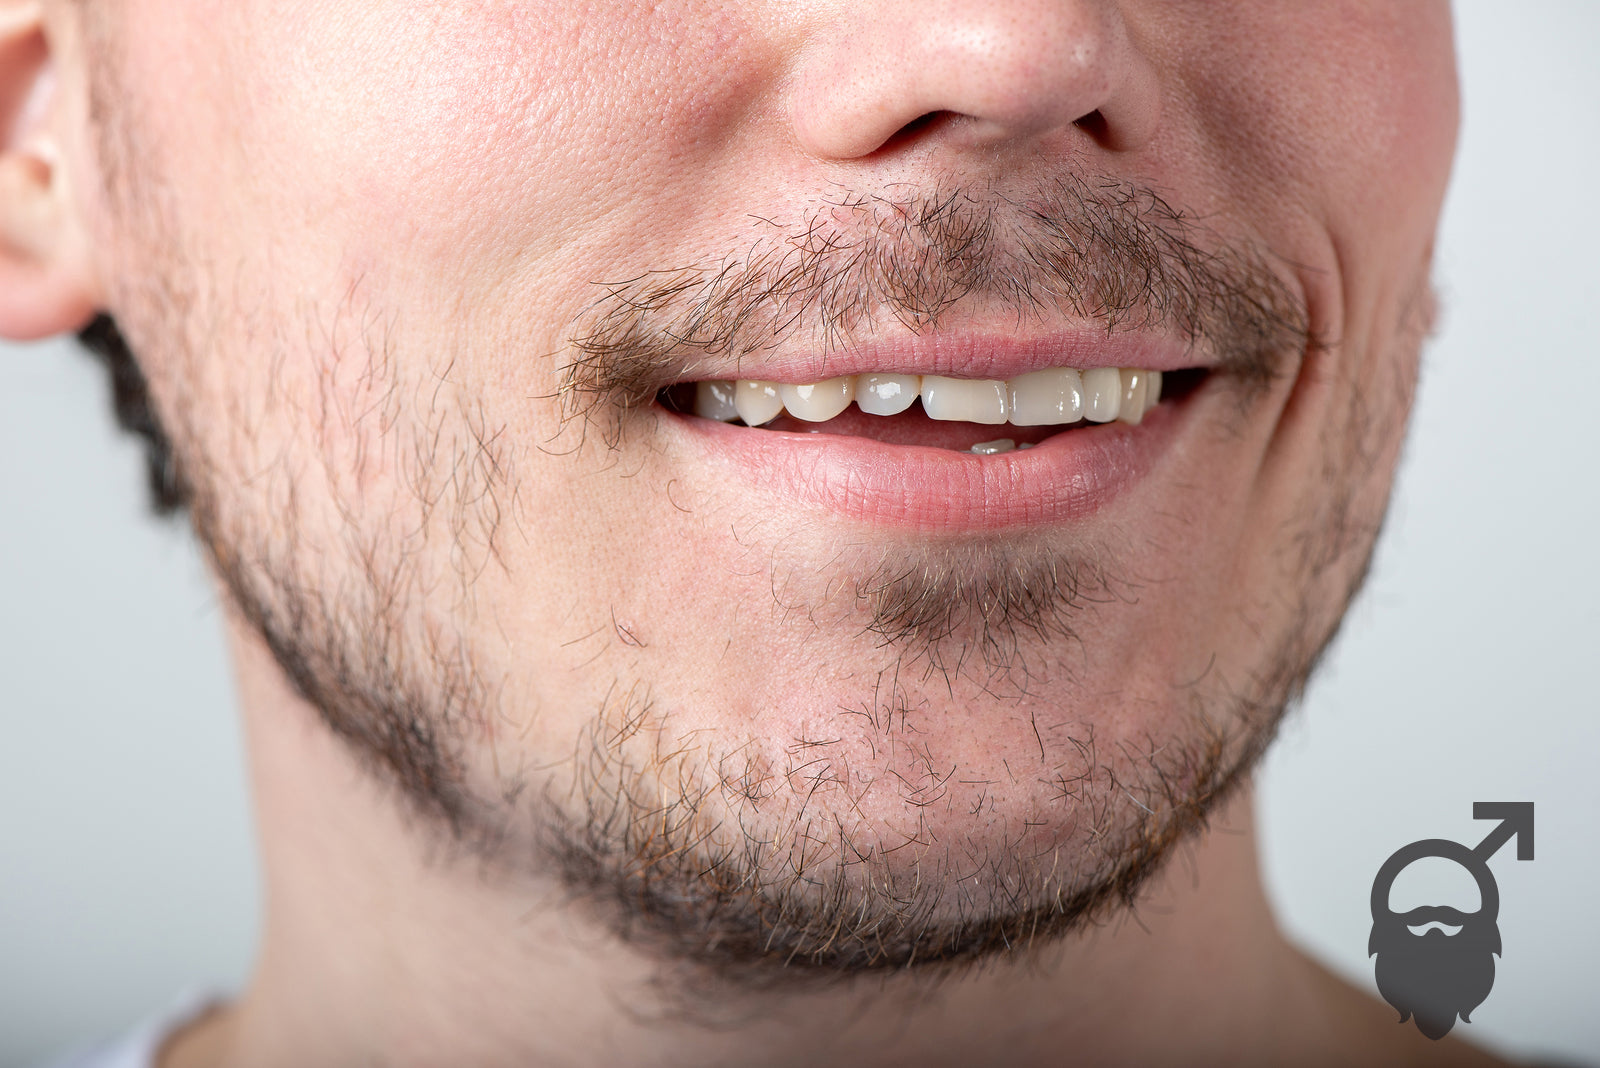 3. "Blond Beard Care: Tips for Maintaining Weak Facial Hair" - wide 4